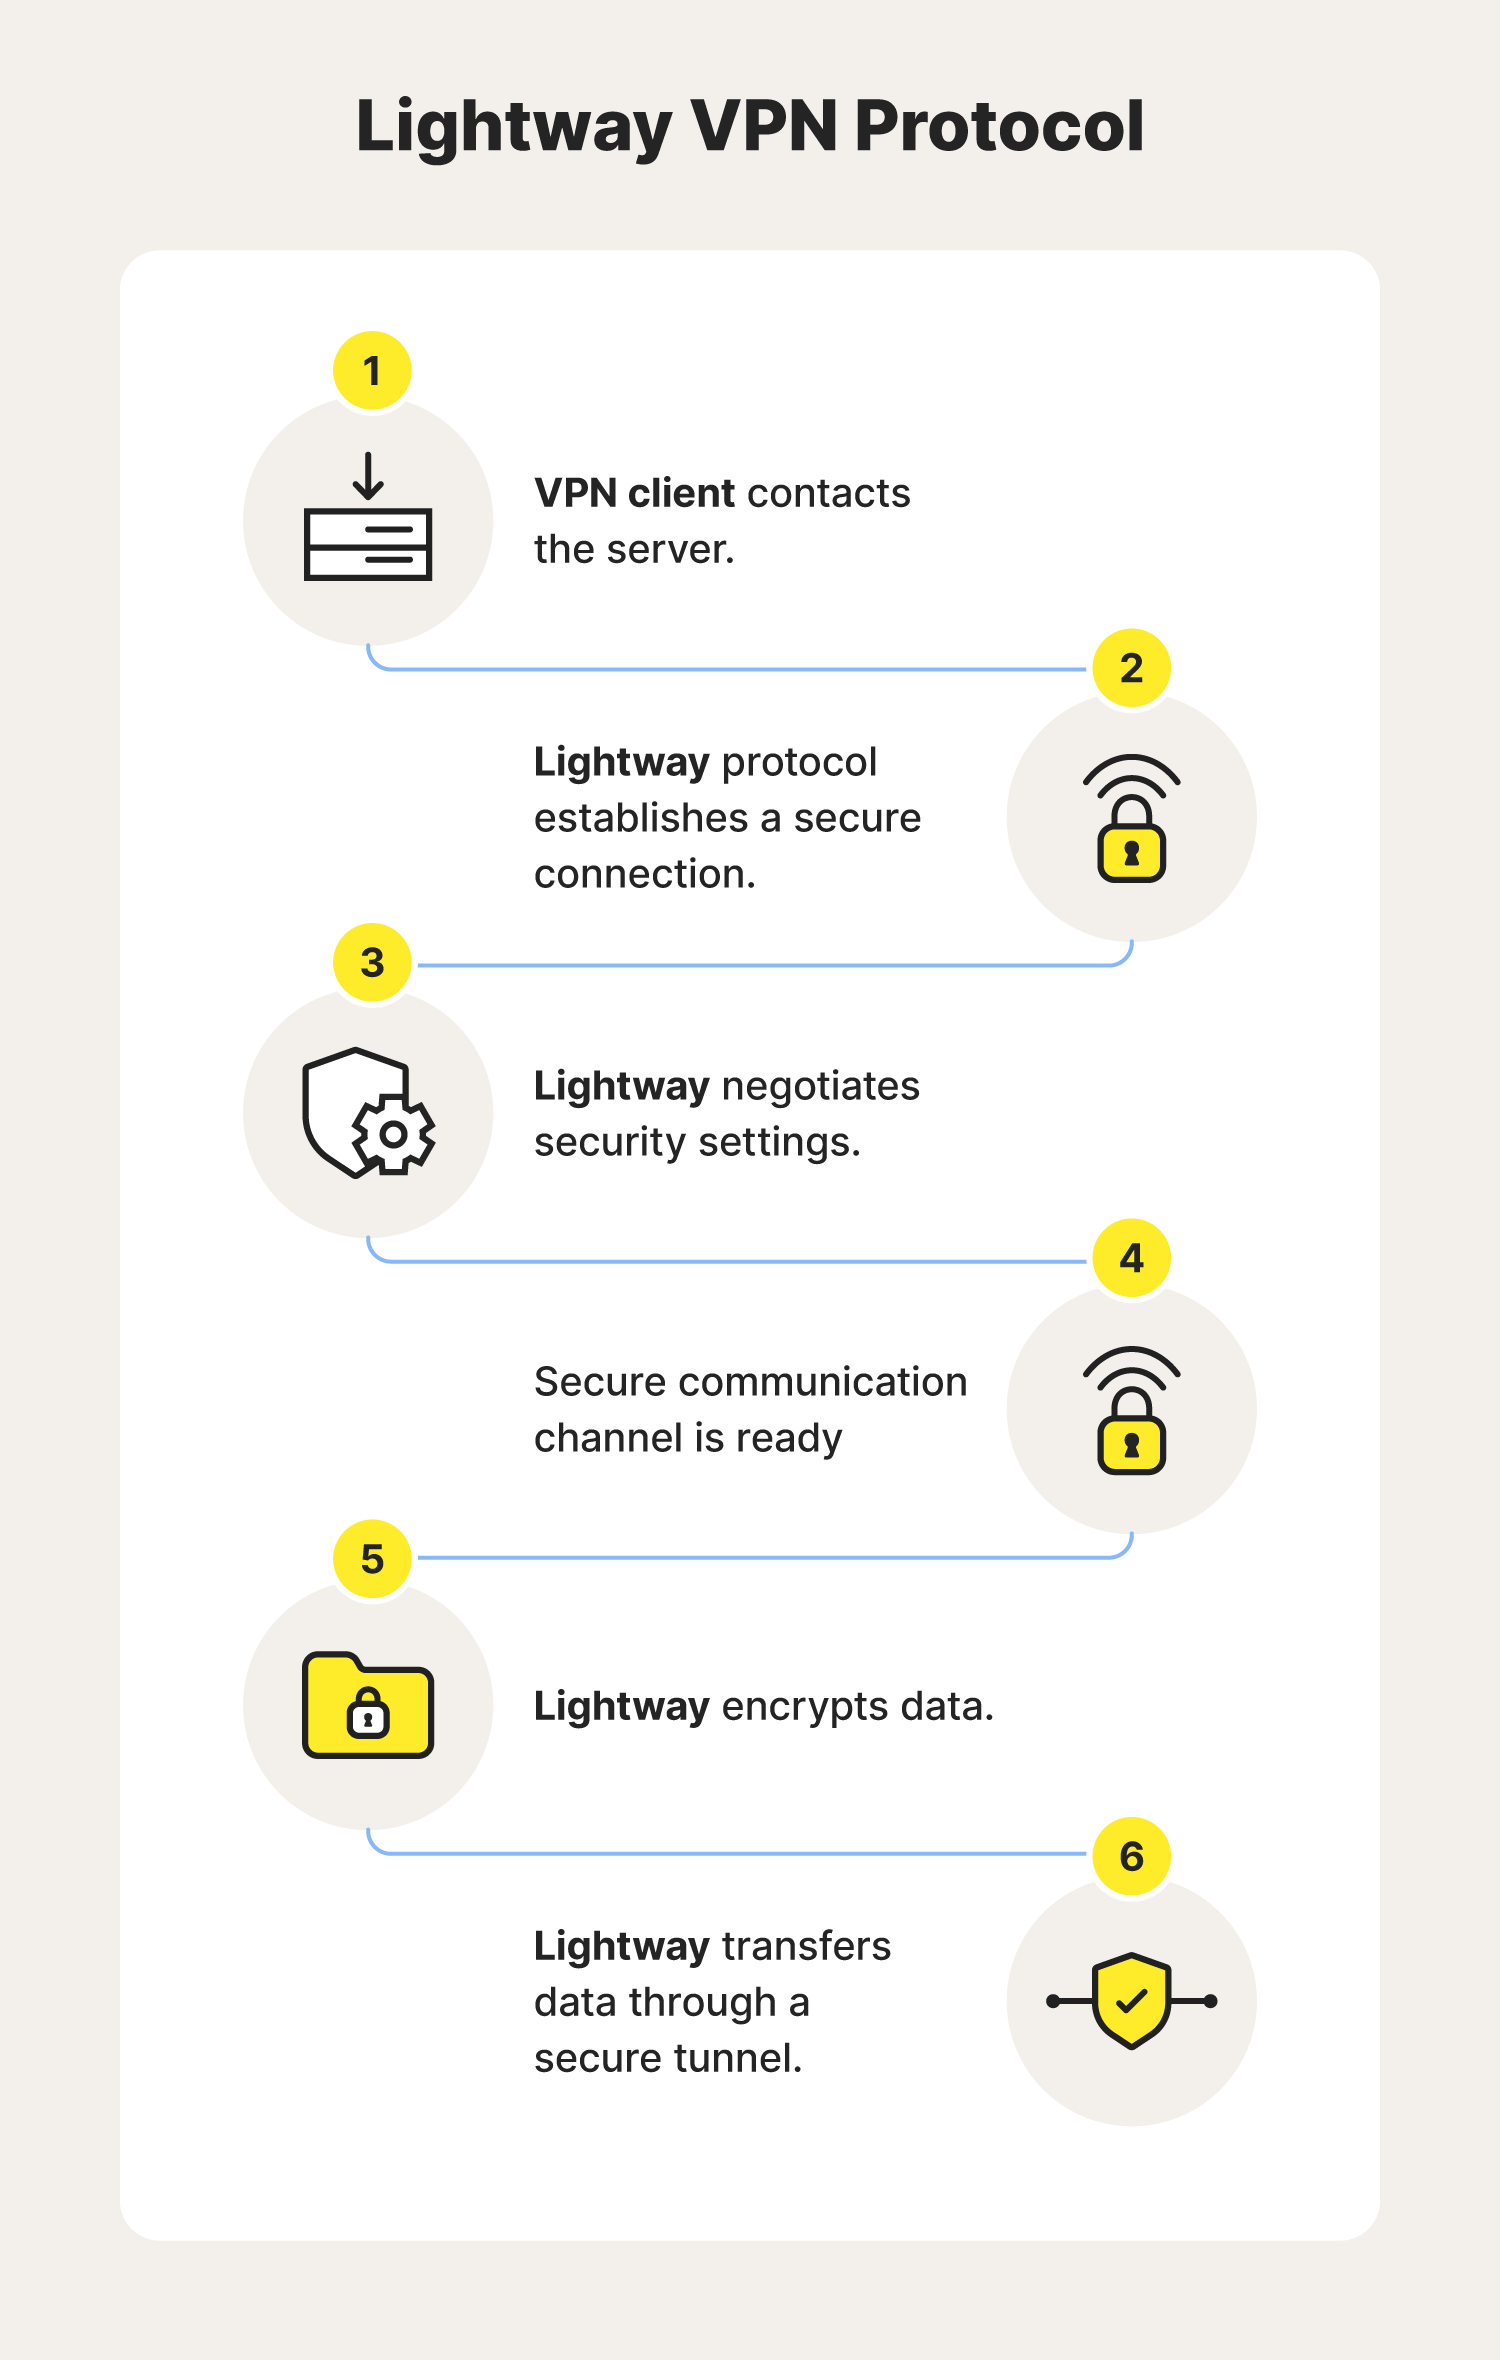  An explanation of how the Lightway VPN protocol works.